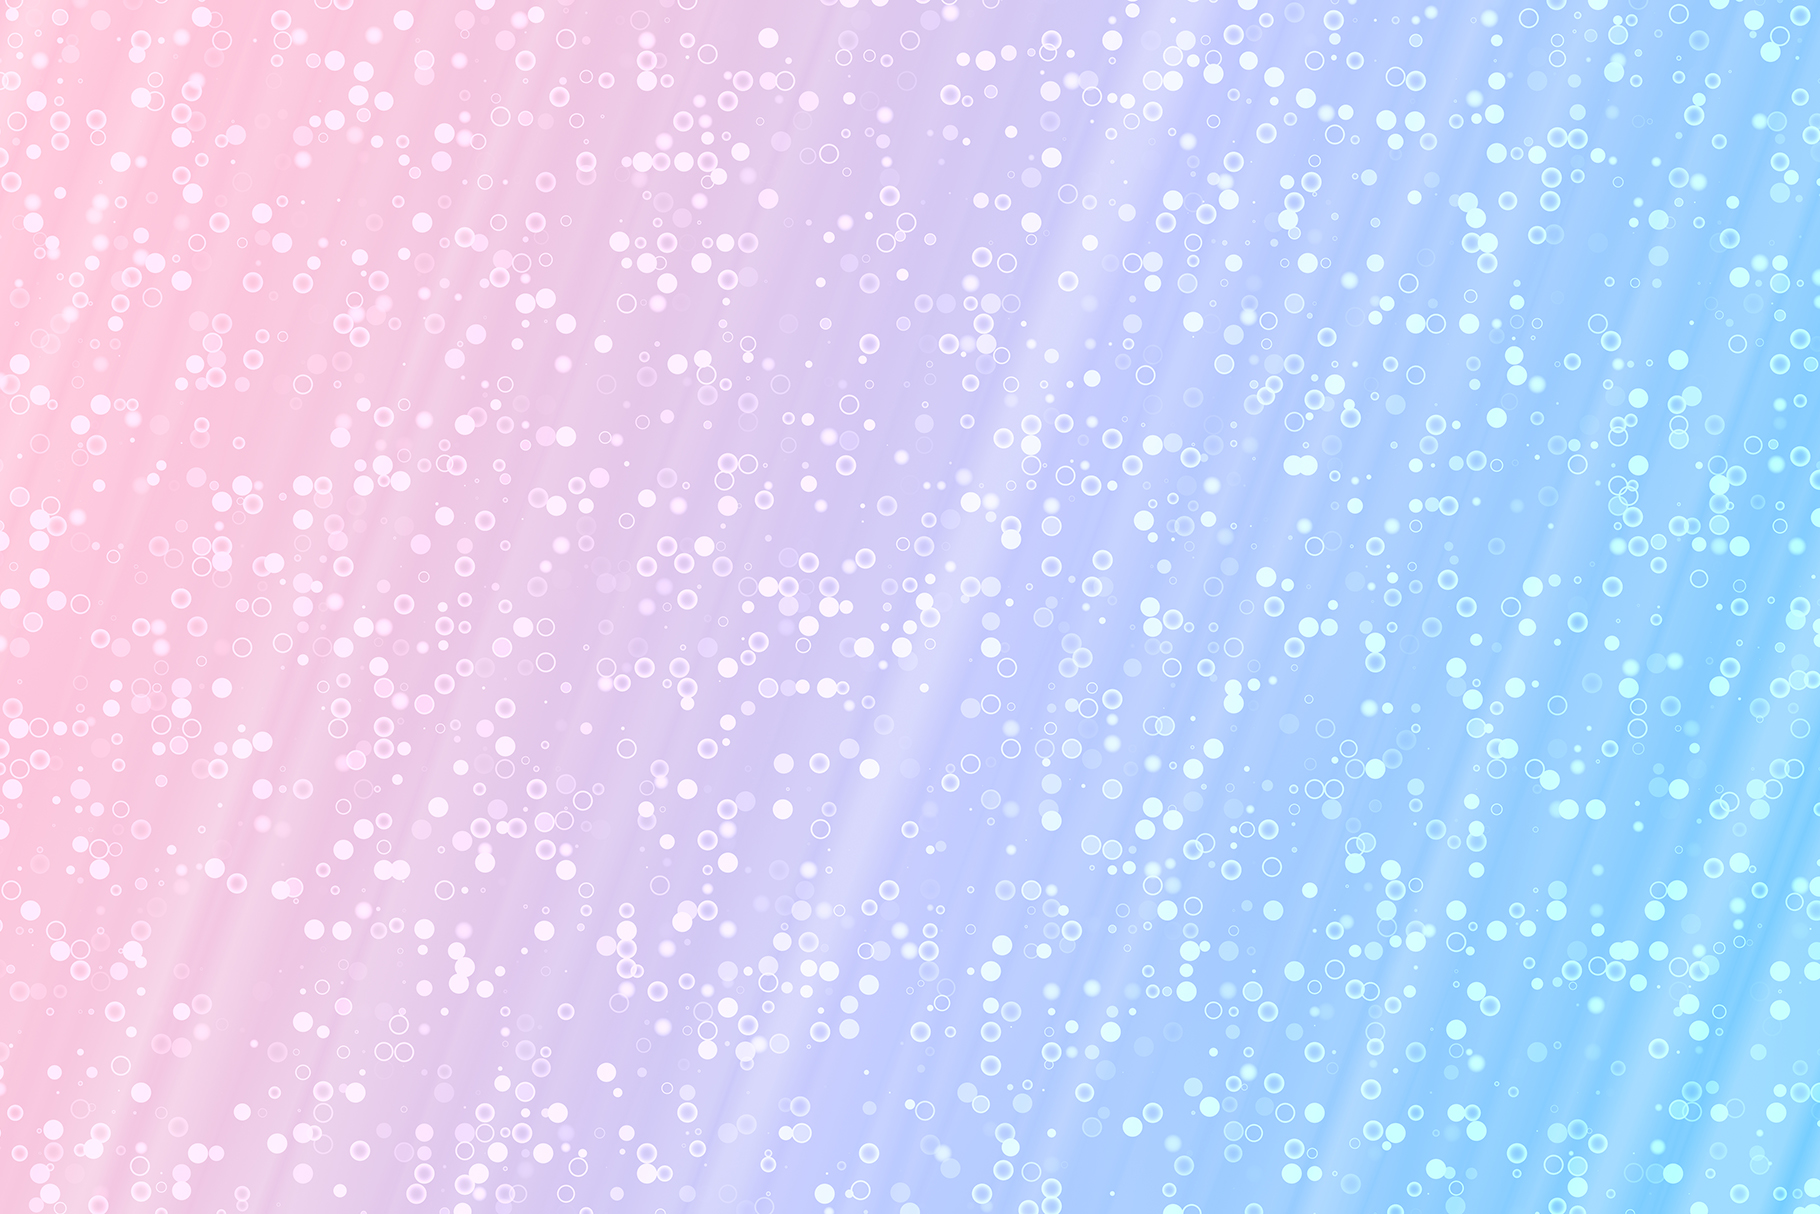 10 Confetti Glitter Backgrounds ~ Textures.World
 Pink And Blue Sparkle Background